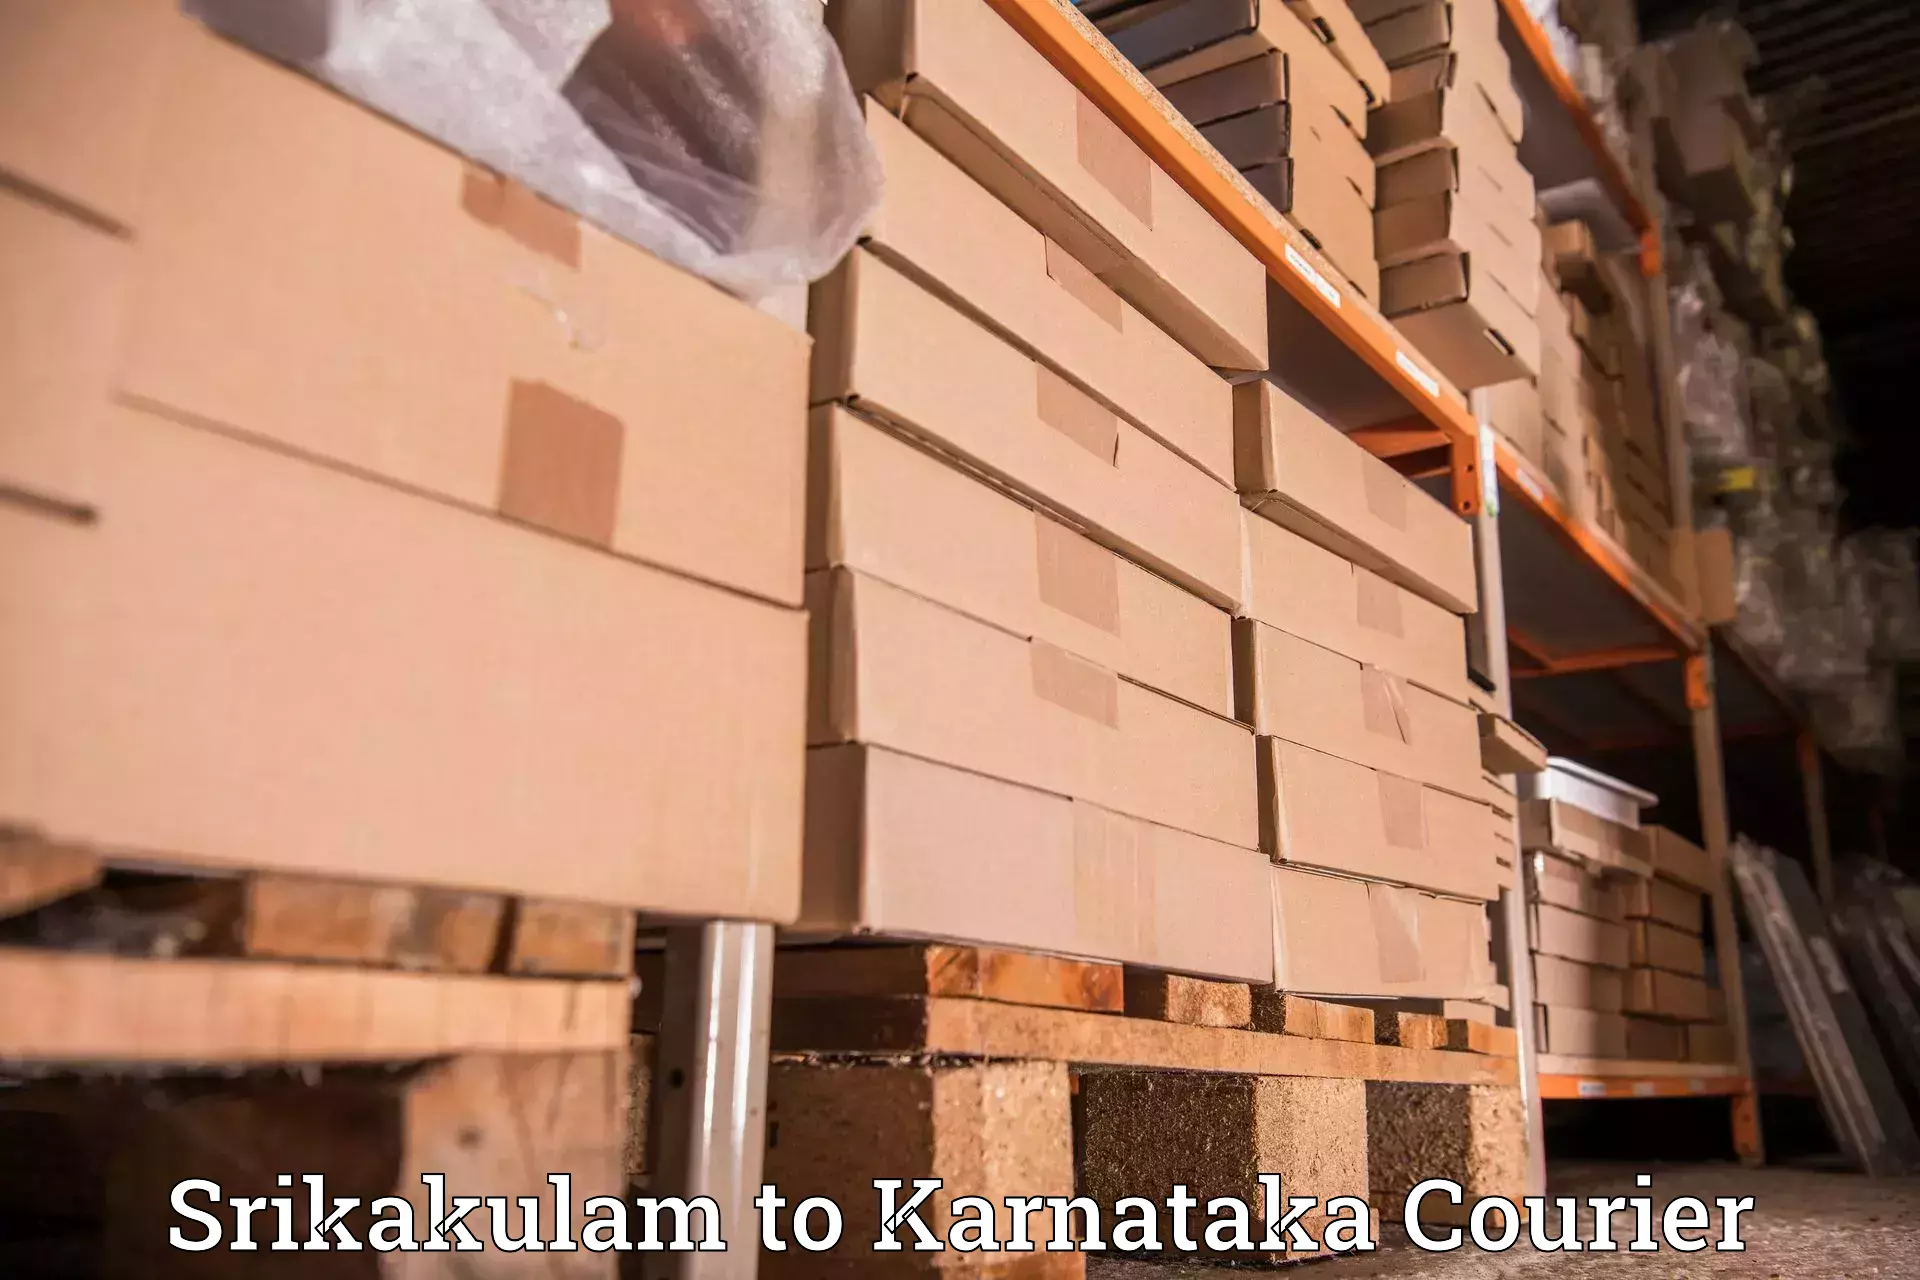 Courier services Srikakulam to Manipal Academy of Higher Education